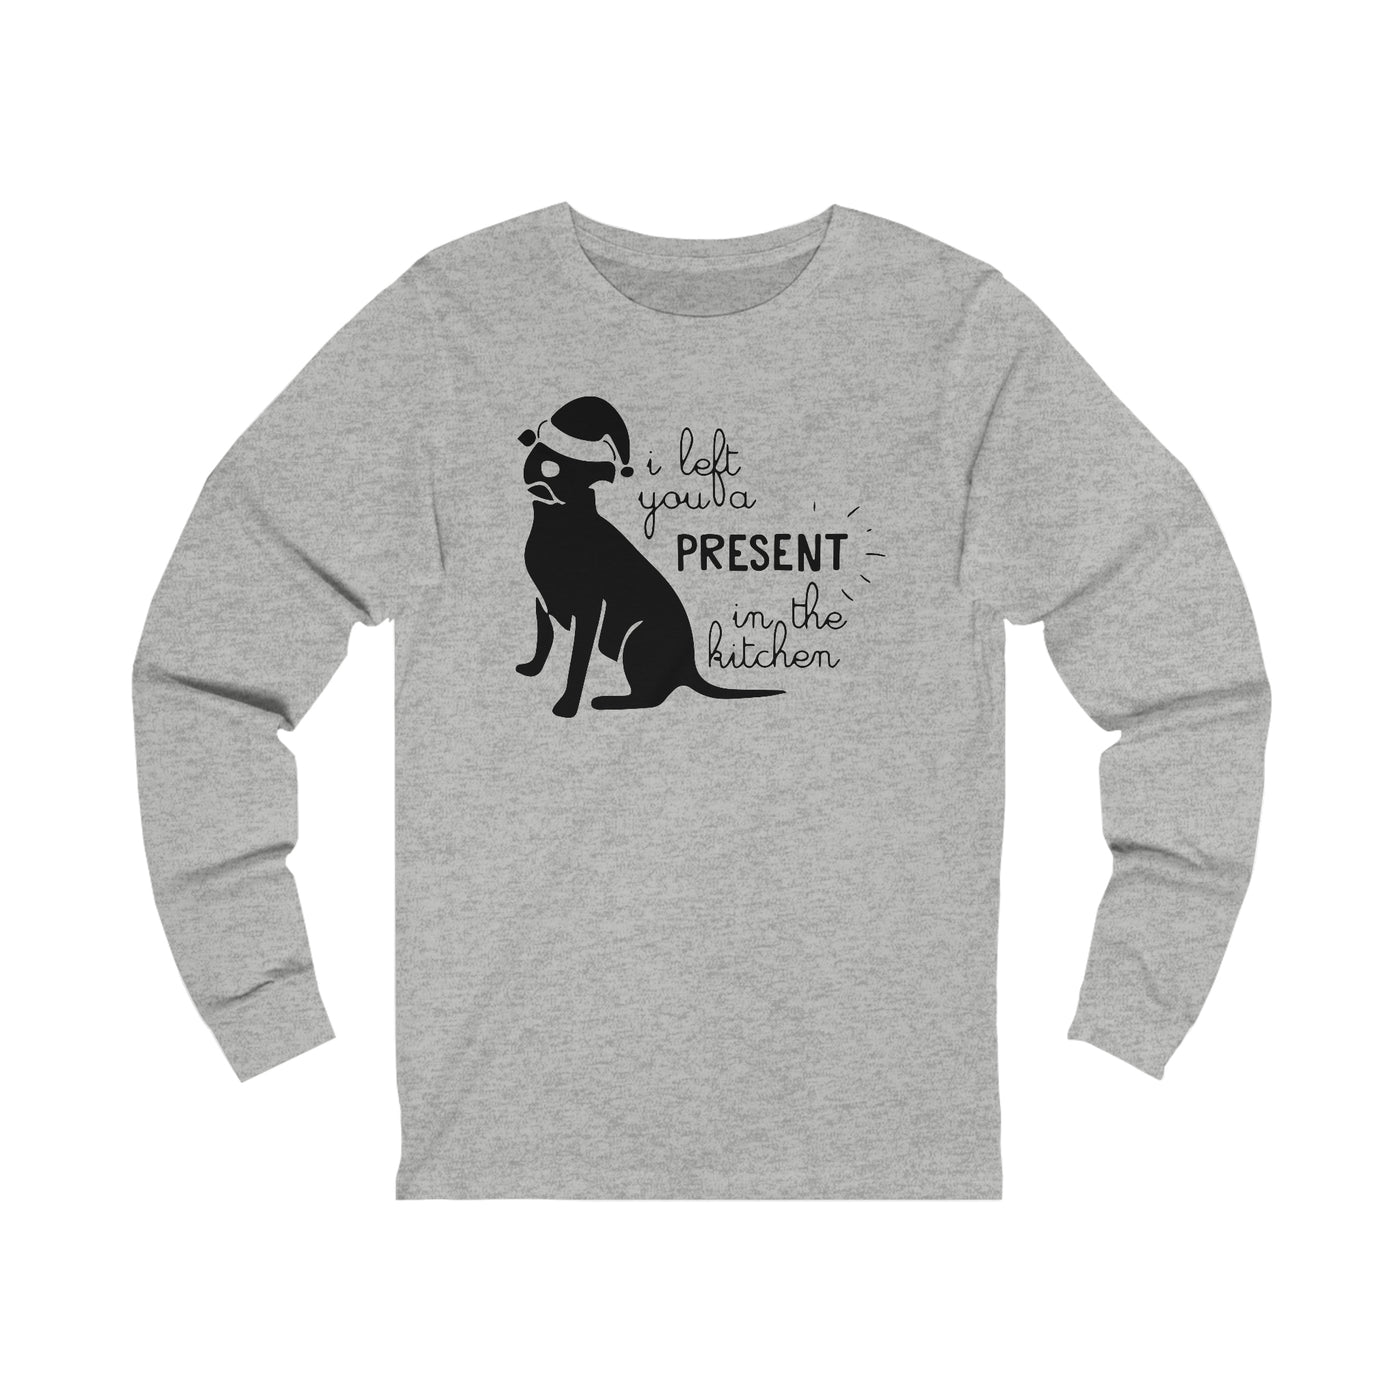 I Left You A Present In The Kitchen Black Print Longsleeve